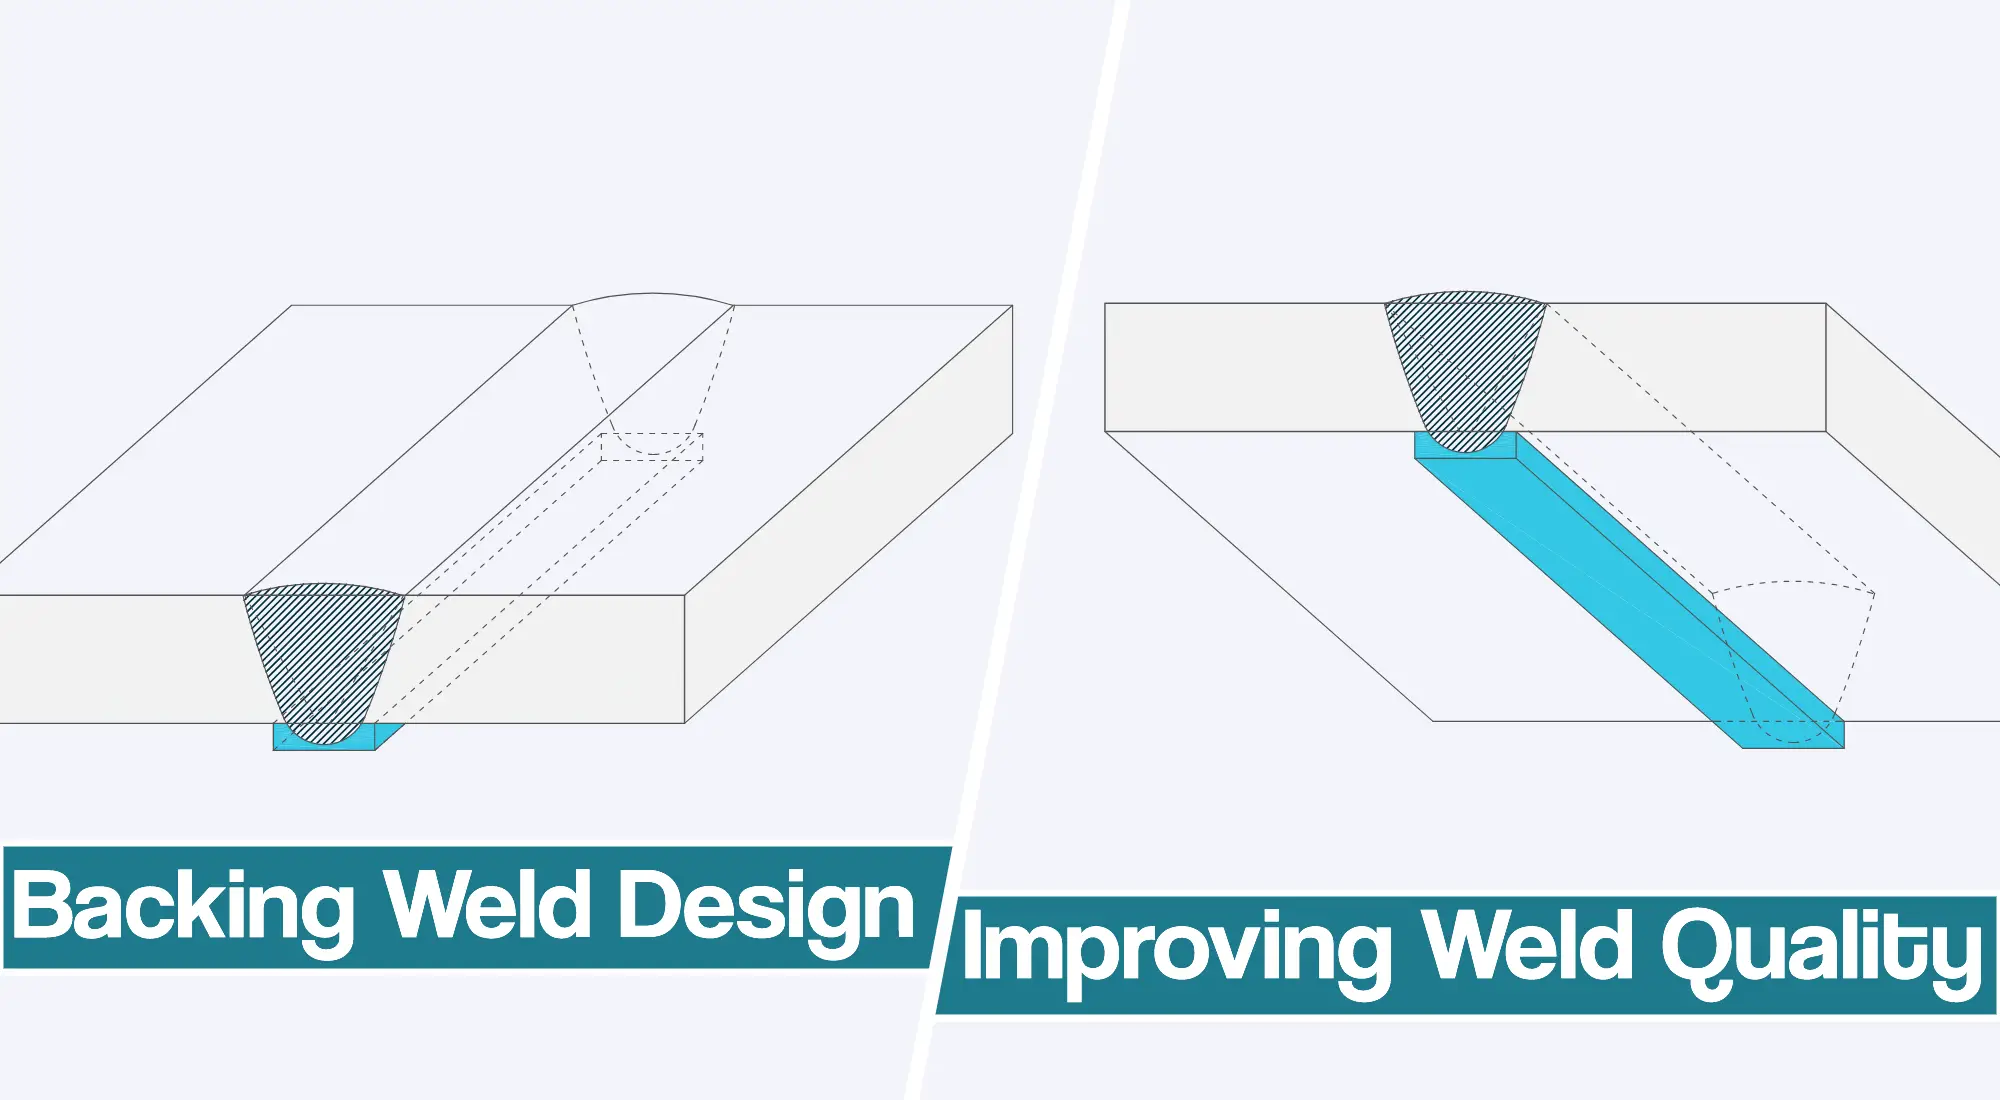 Backing Weld Design For Improving Weld Quality